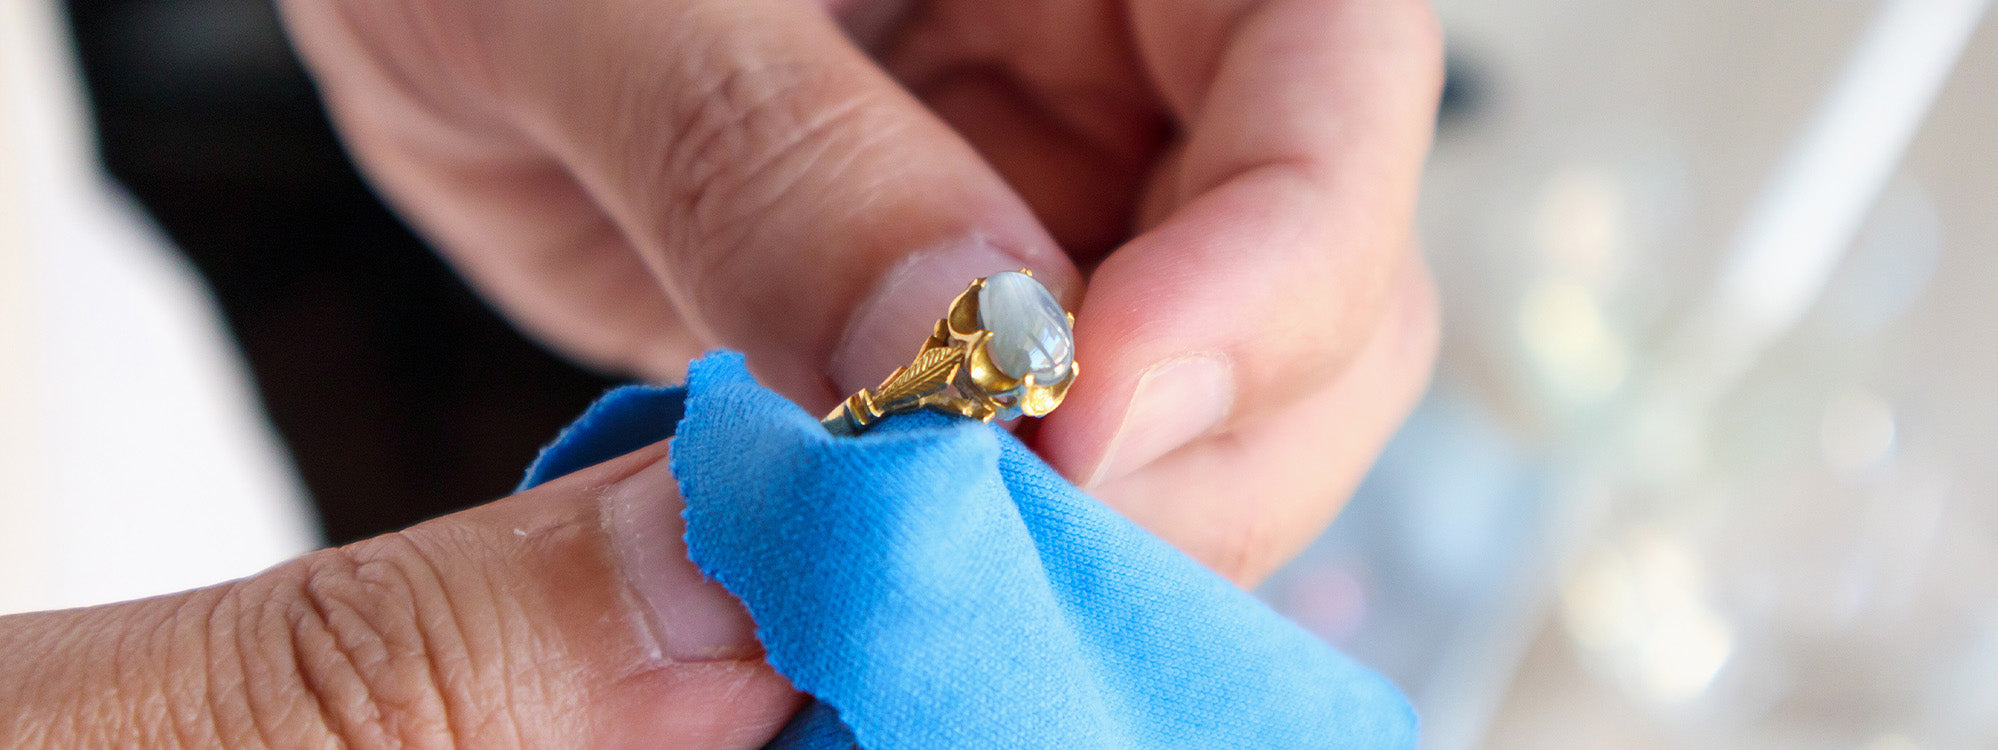 How to Keep Gold-Plated Jewelry from Tarnishing